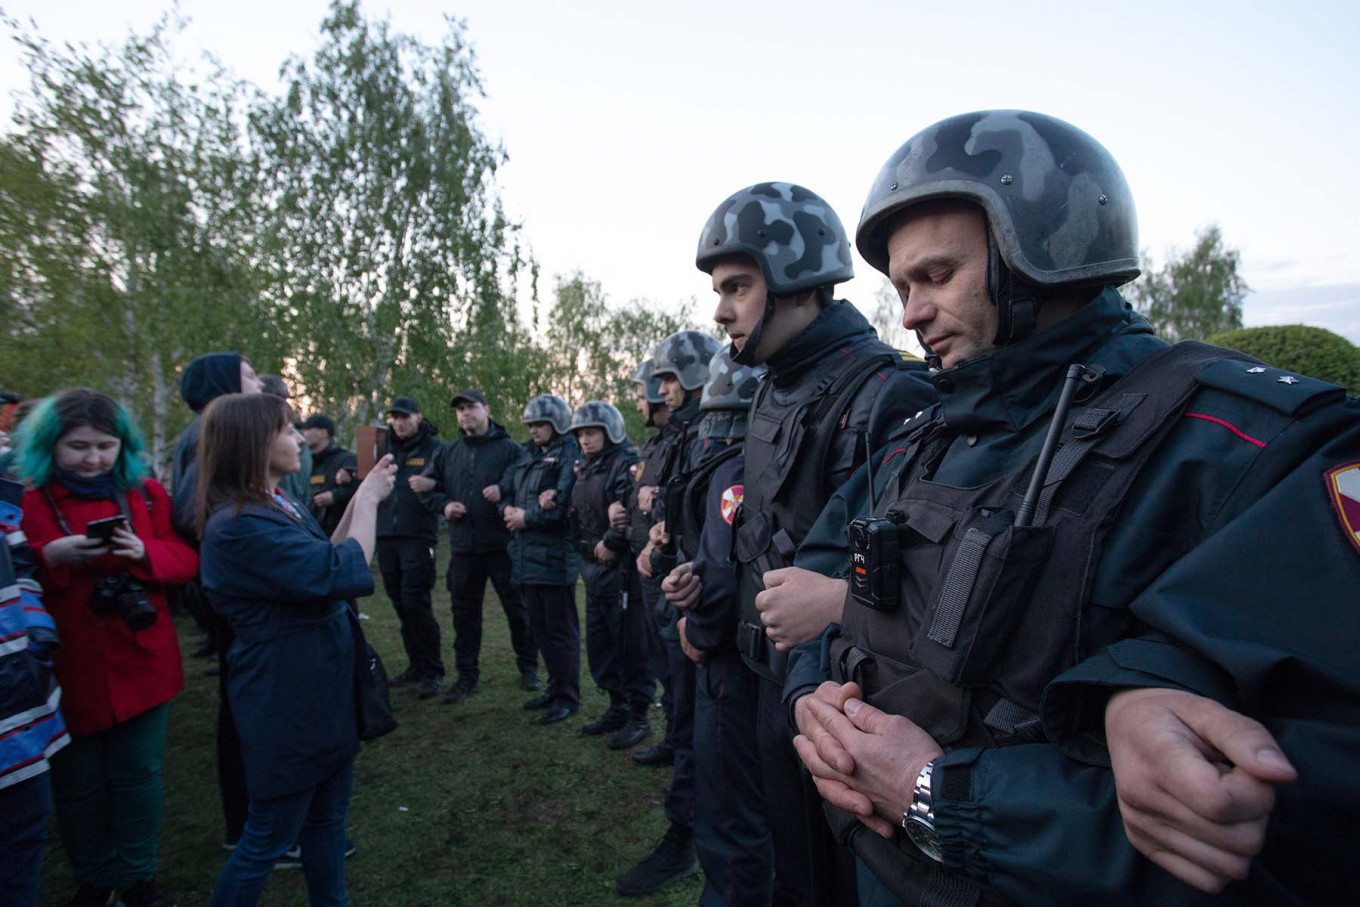 5 Hospitalized, 29 Detained in Russian Church Construction Clashes